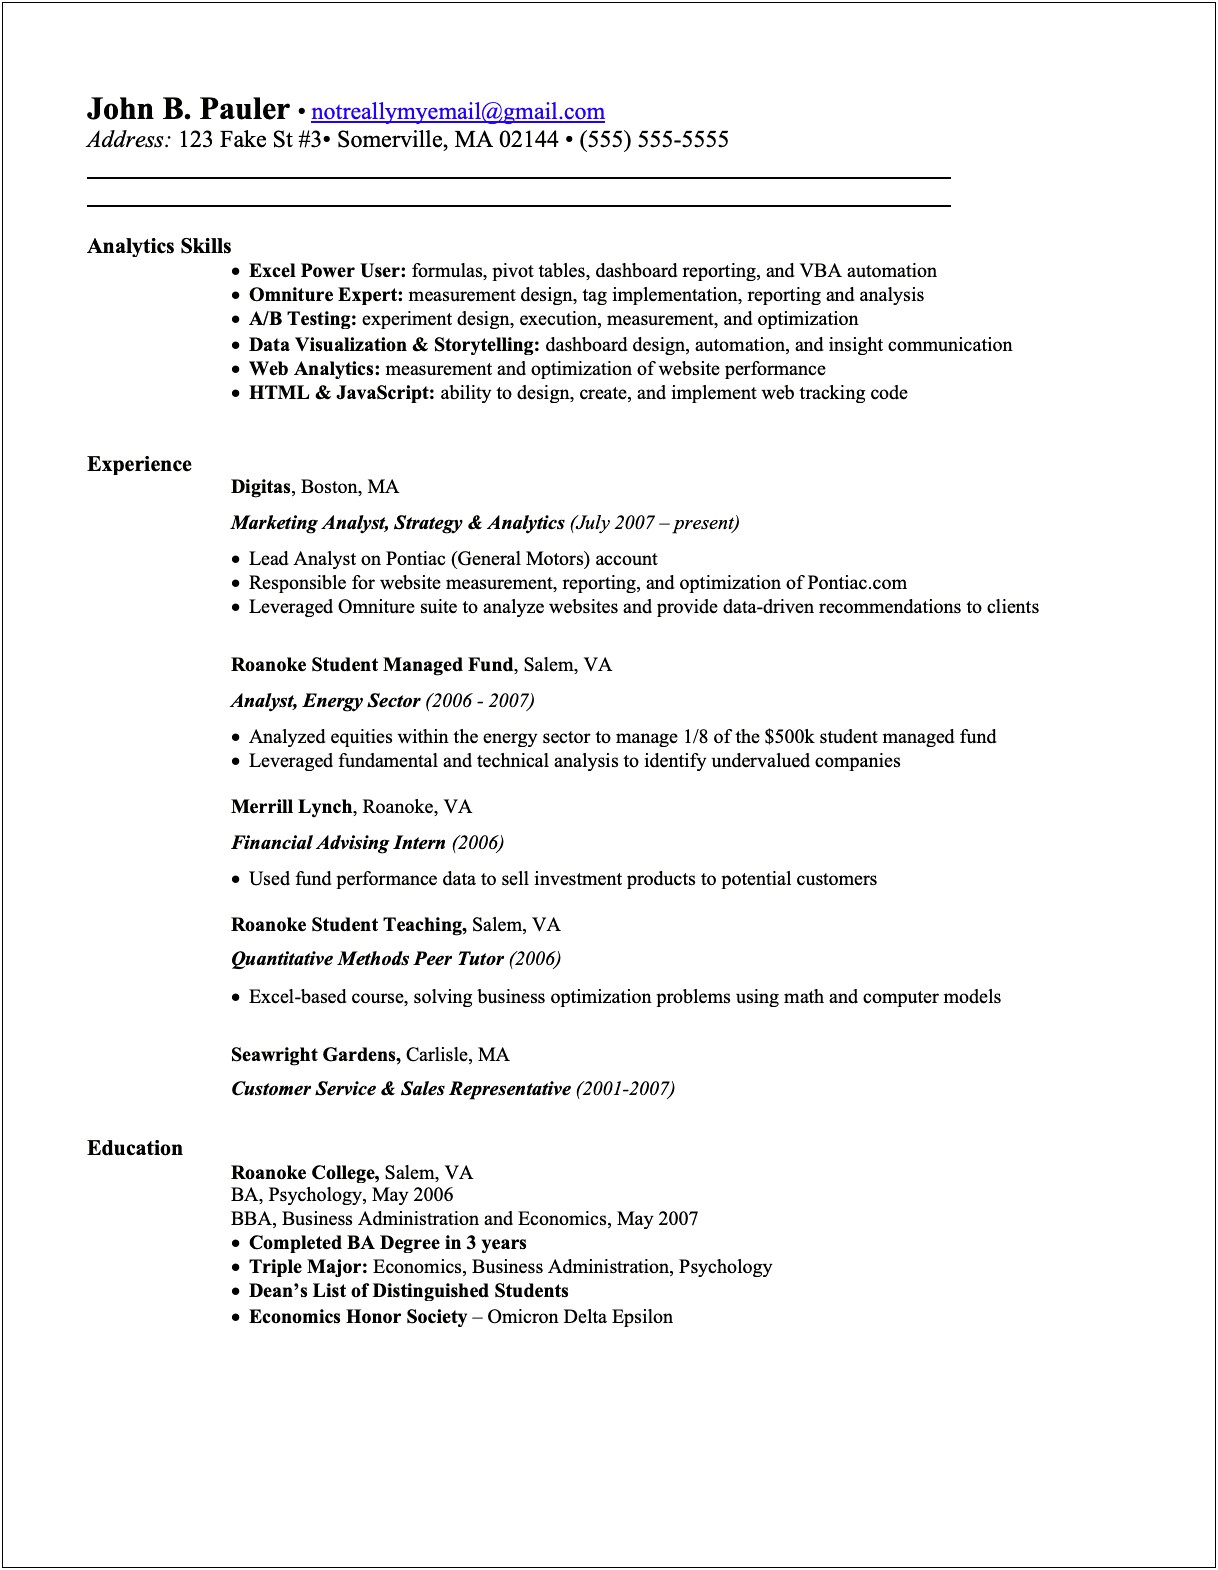 Resume For Intelligence Analyst No Experience